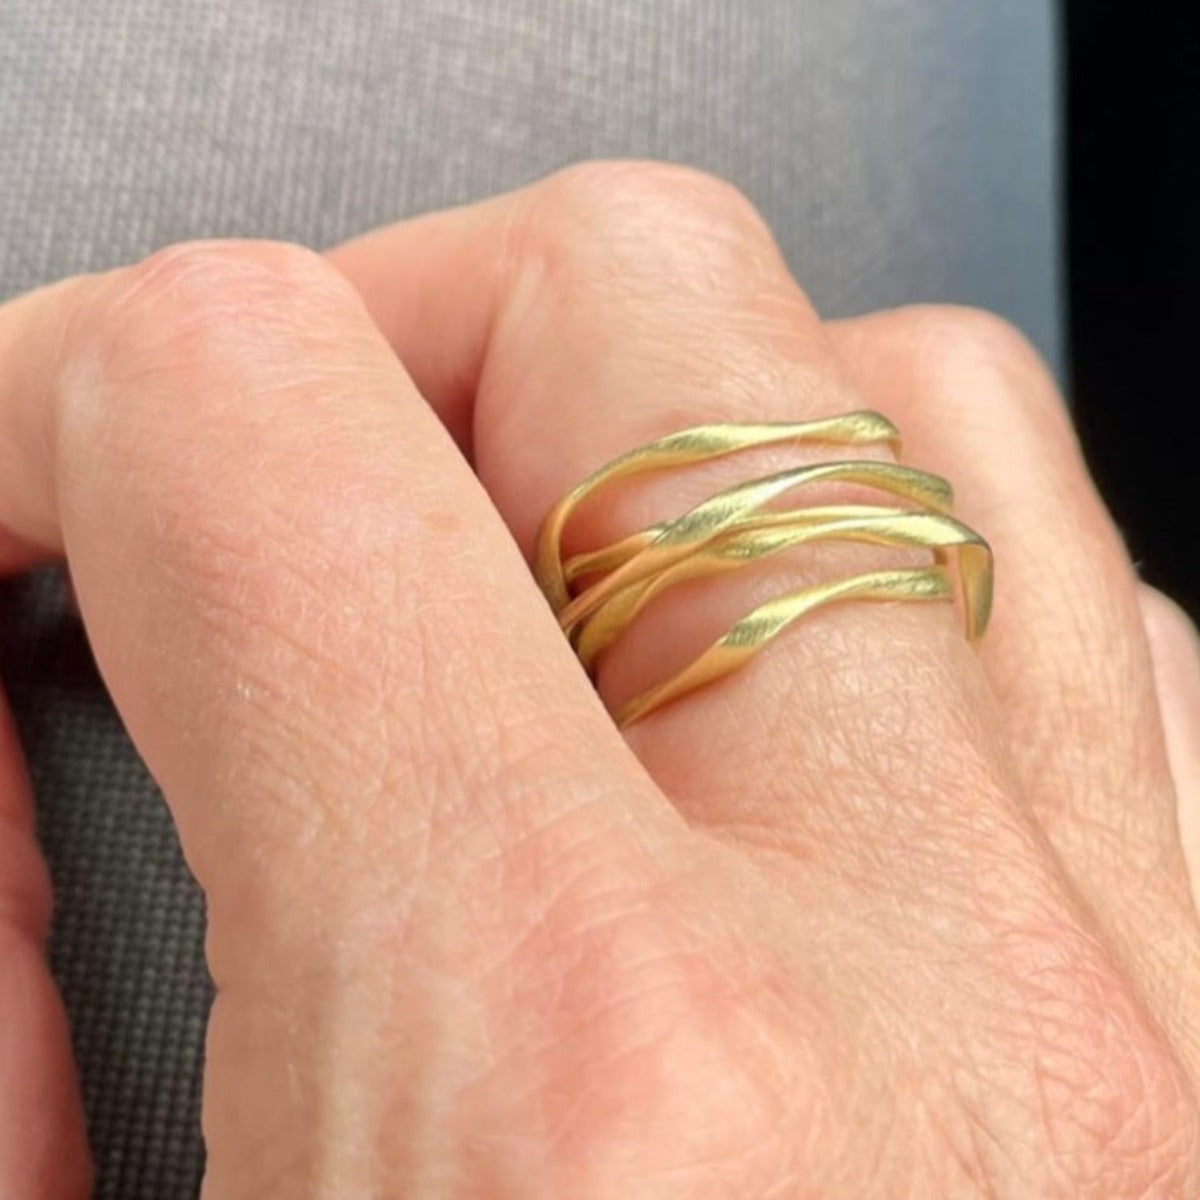 Flair ring no.5 in 18 kt. gold with 5 windings